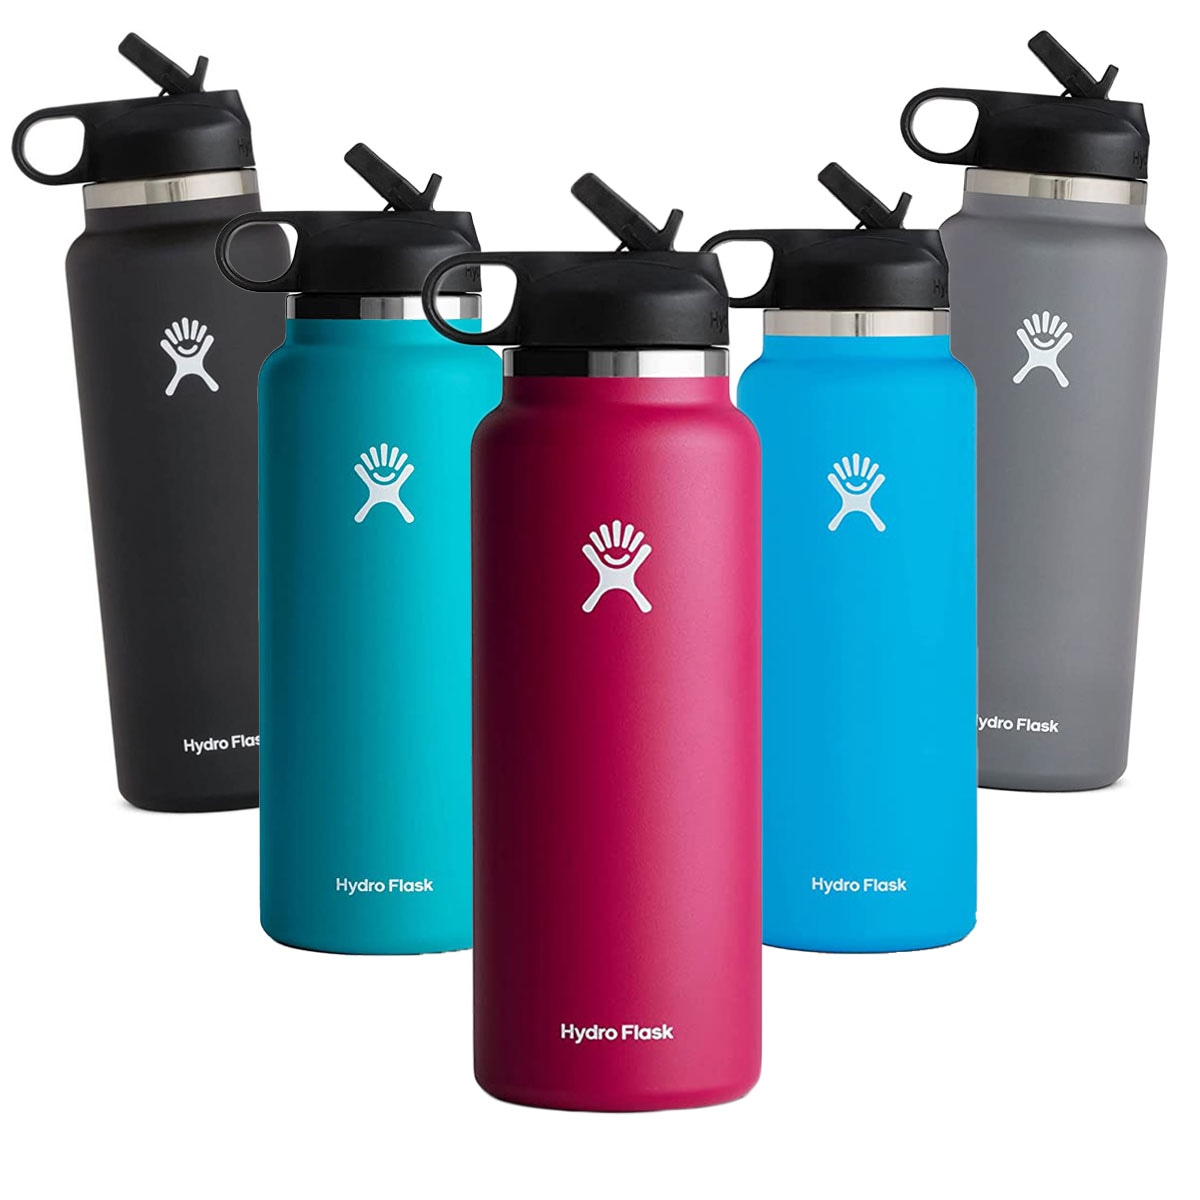 https://akns-images.eonline.com/eol_images/Entire_Site/2022912/rs_1200x1200-221012061402-1200-Hydroflask-KD-101222.jpg?fit=around%7C1200:1200&output-quality=90&crop=1200:1200;center,top